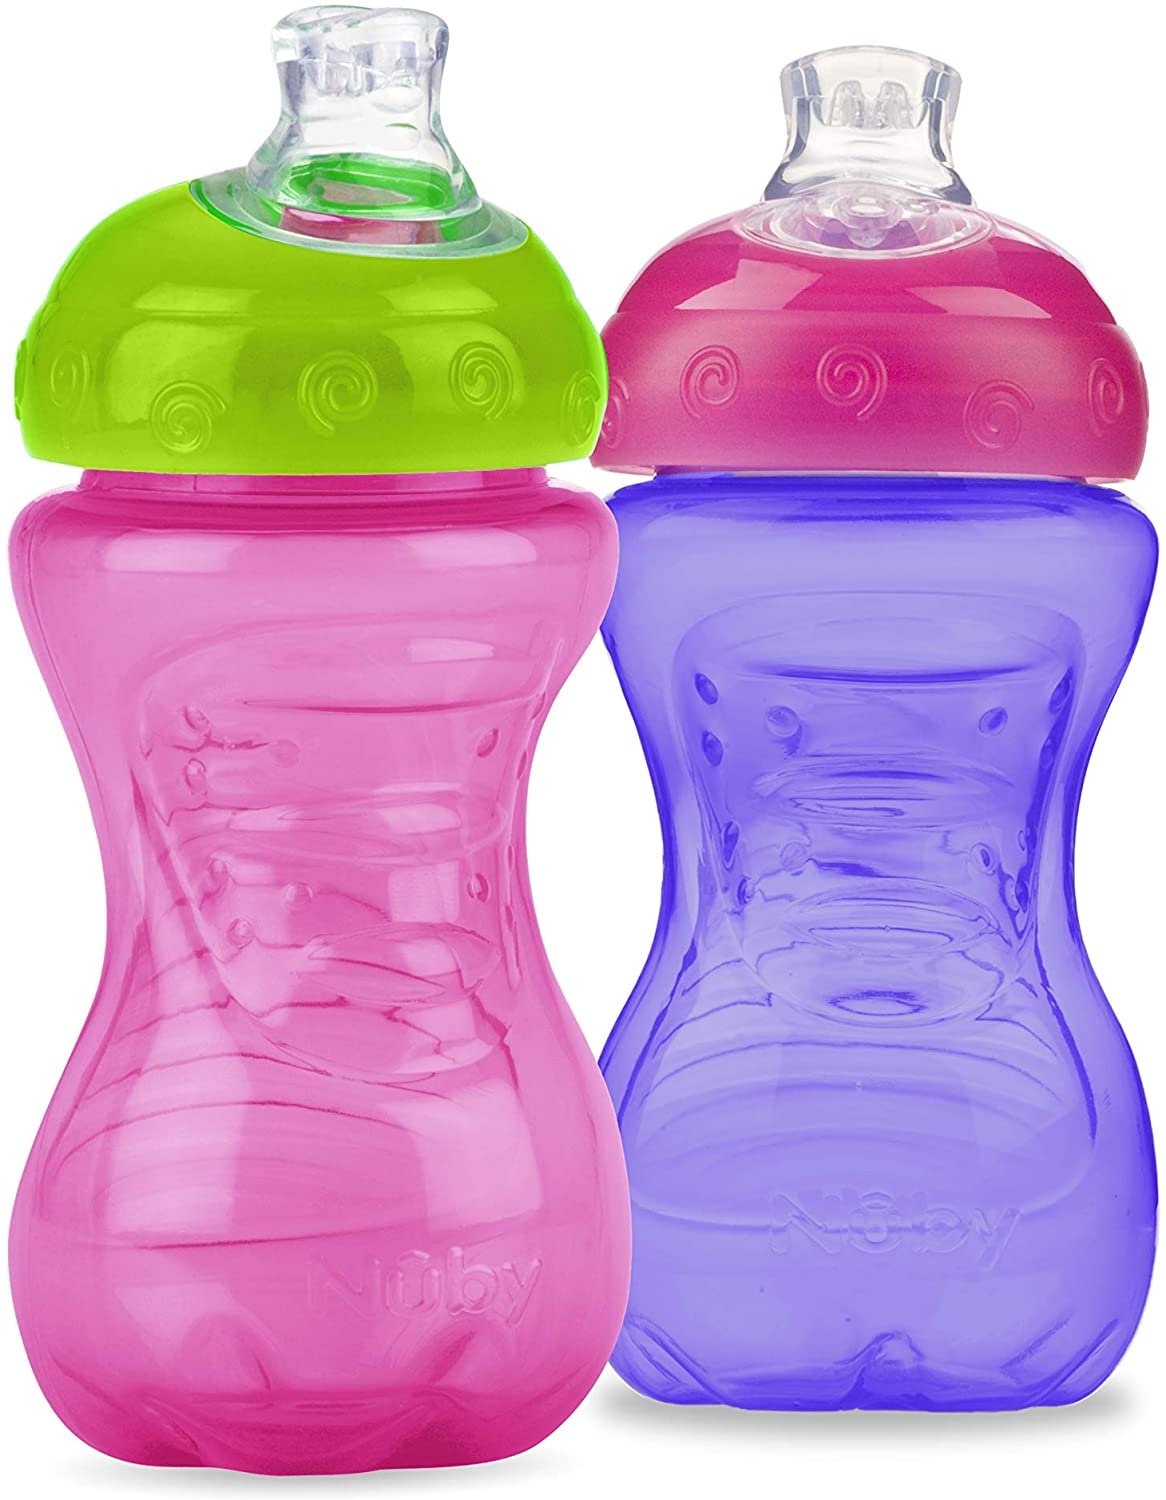 Nuby No-Spill Super Spout Easy Grip Cup, 10 Ounce, 6 Month (Pink and Purple)